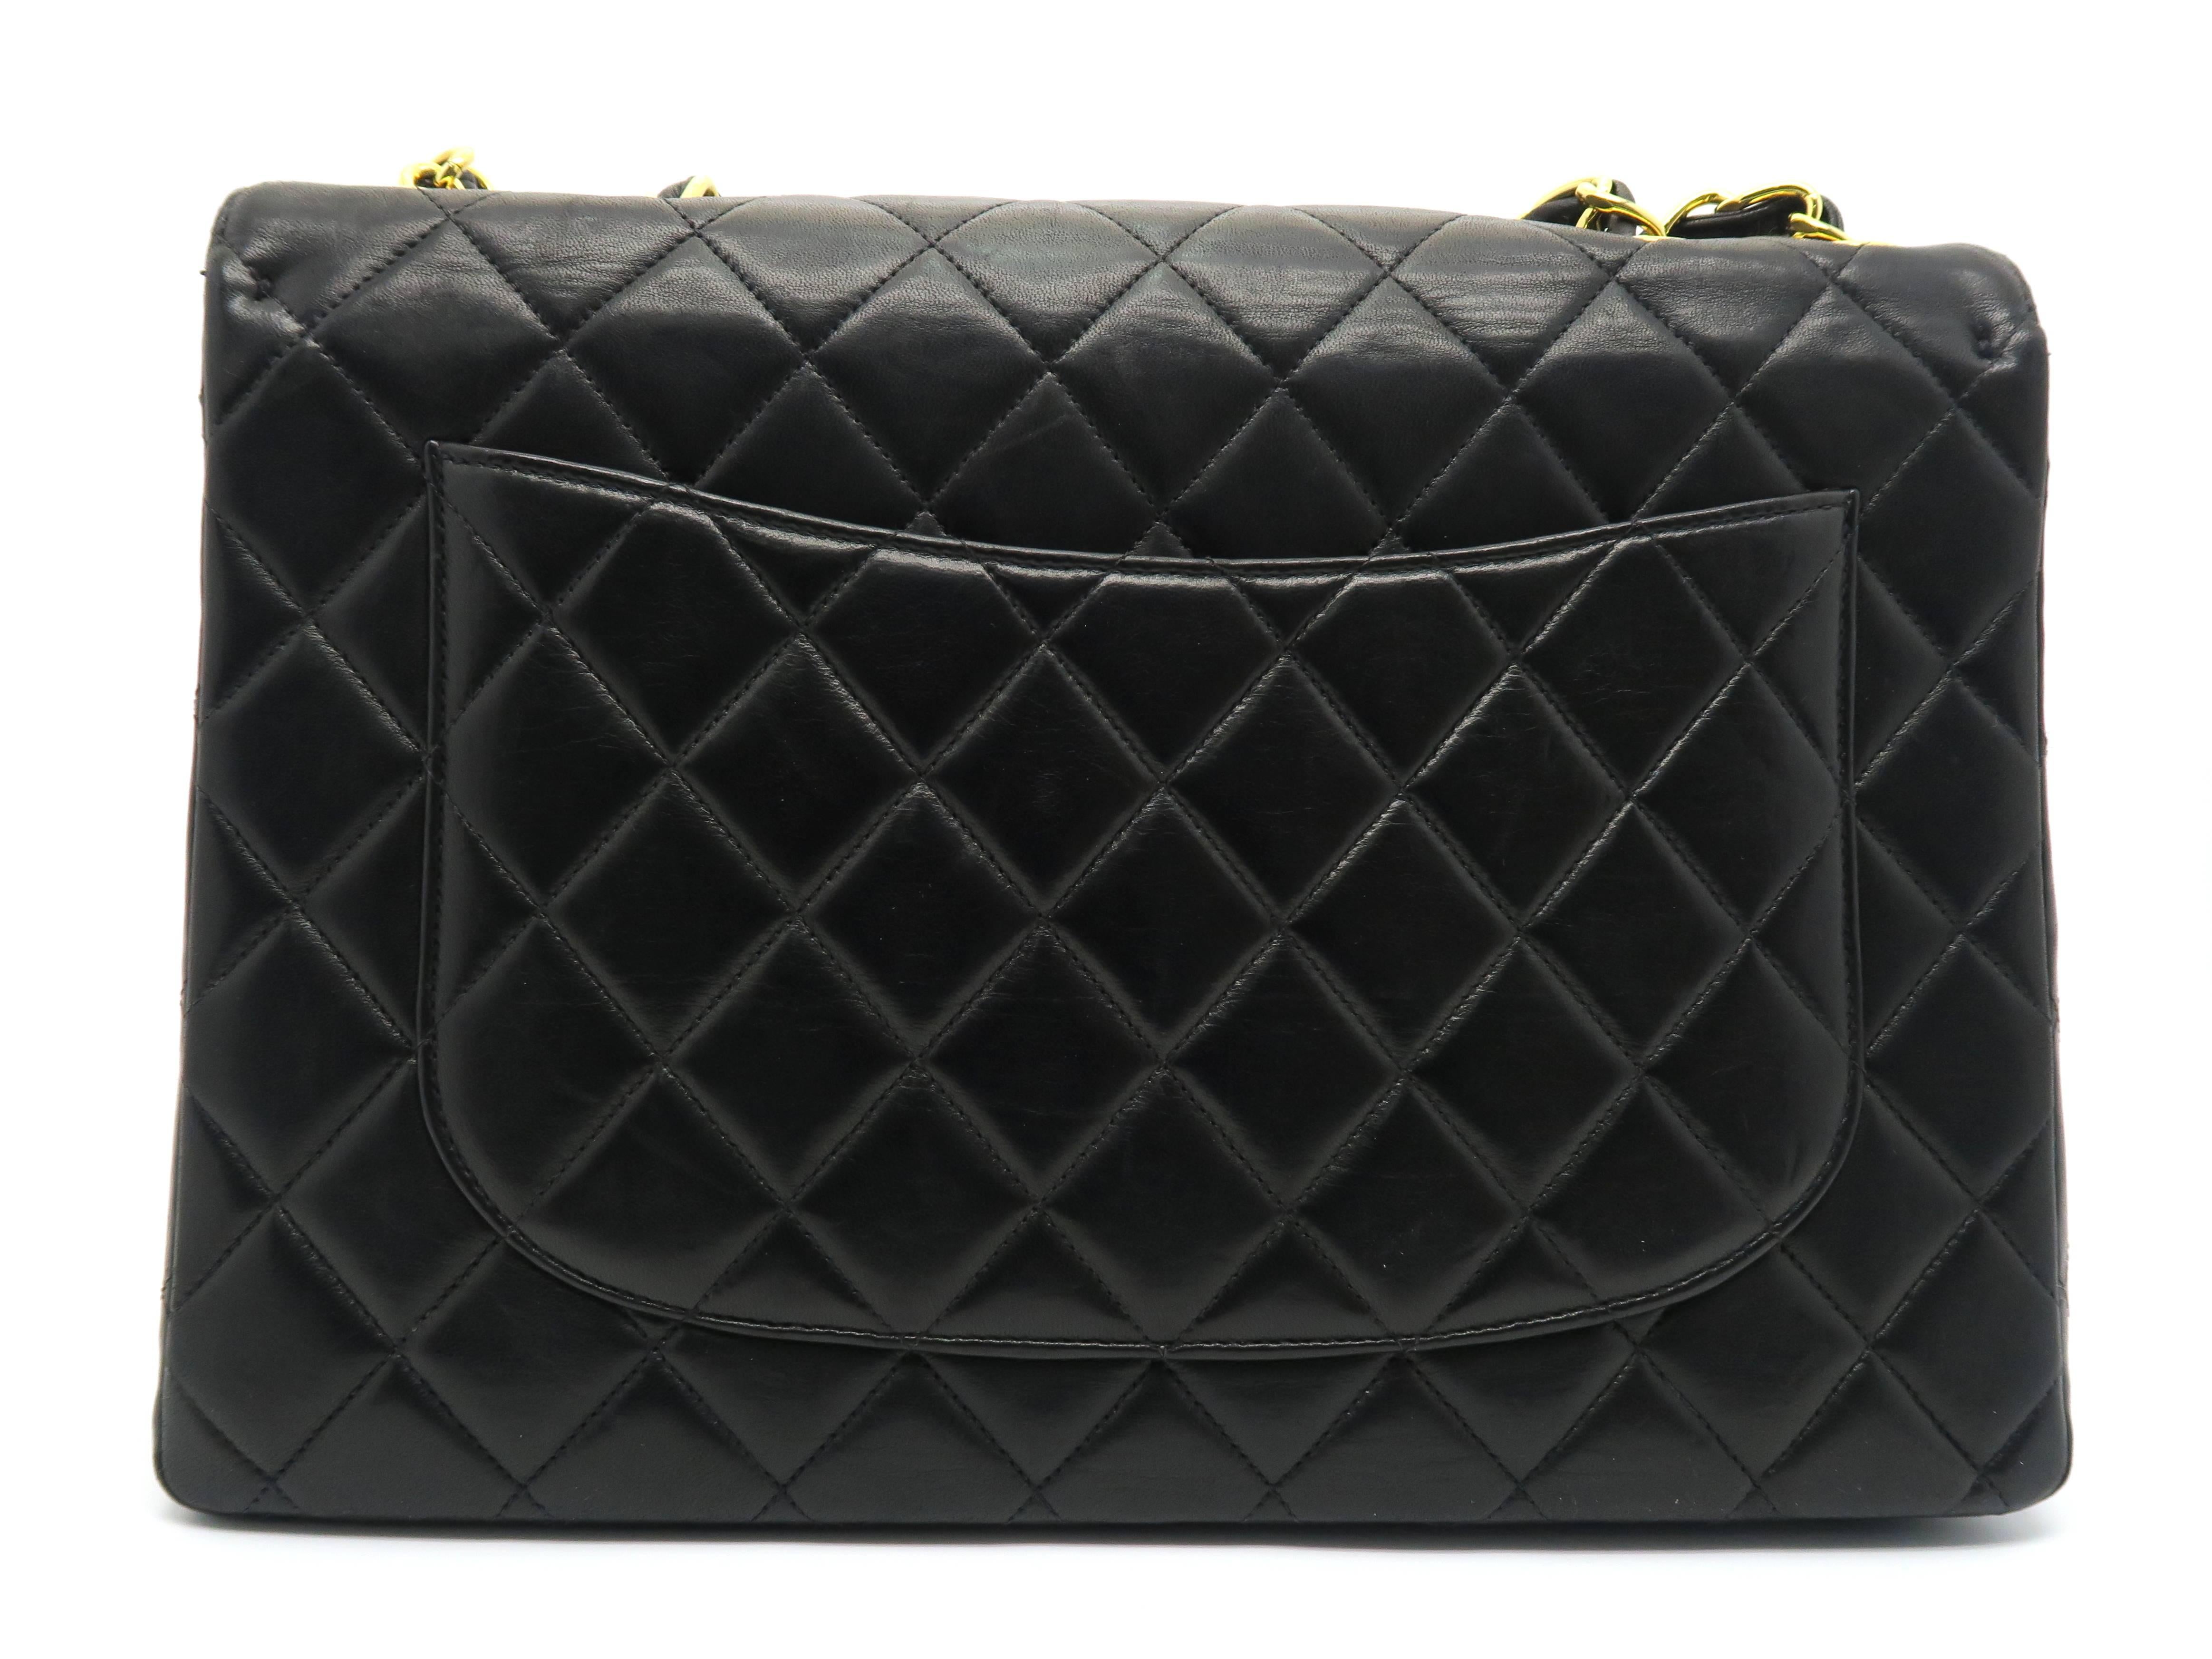 Chanel Black Quilting Lambskin Leather Gold Metal Flap Bag In Good Condition For Sale In Kowloon, HK